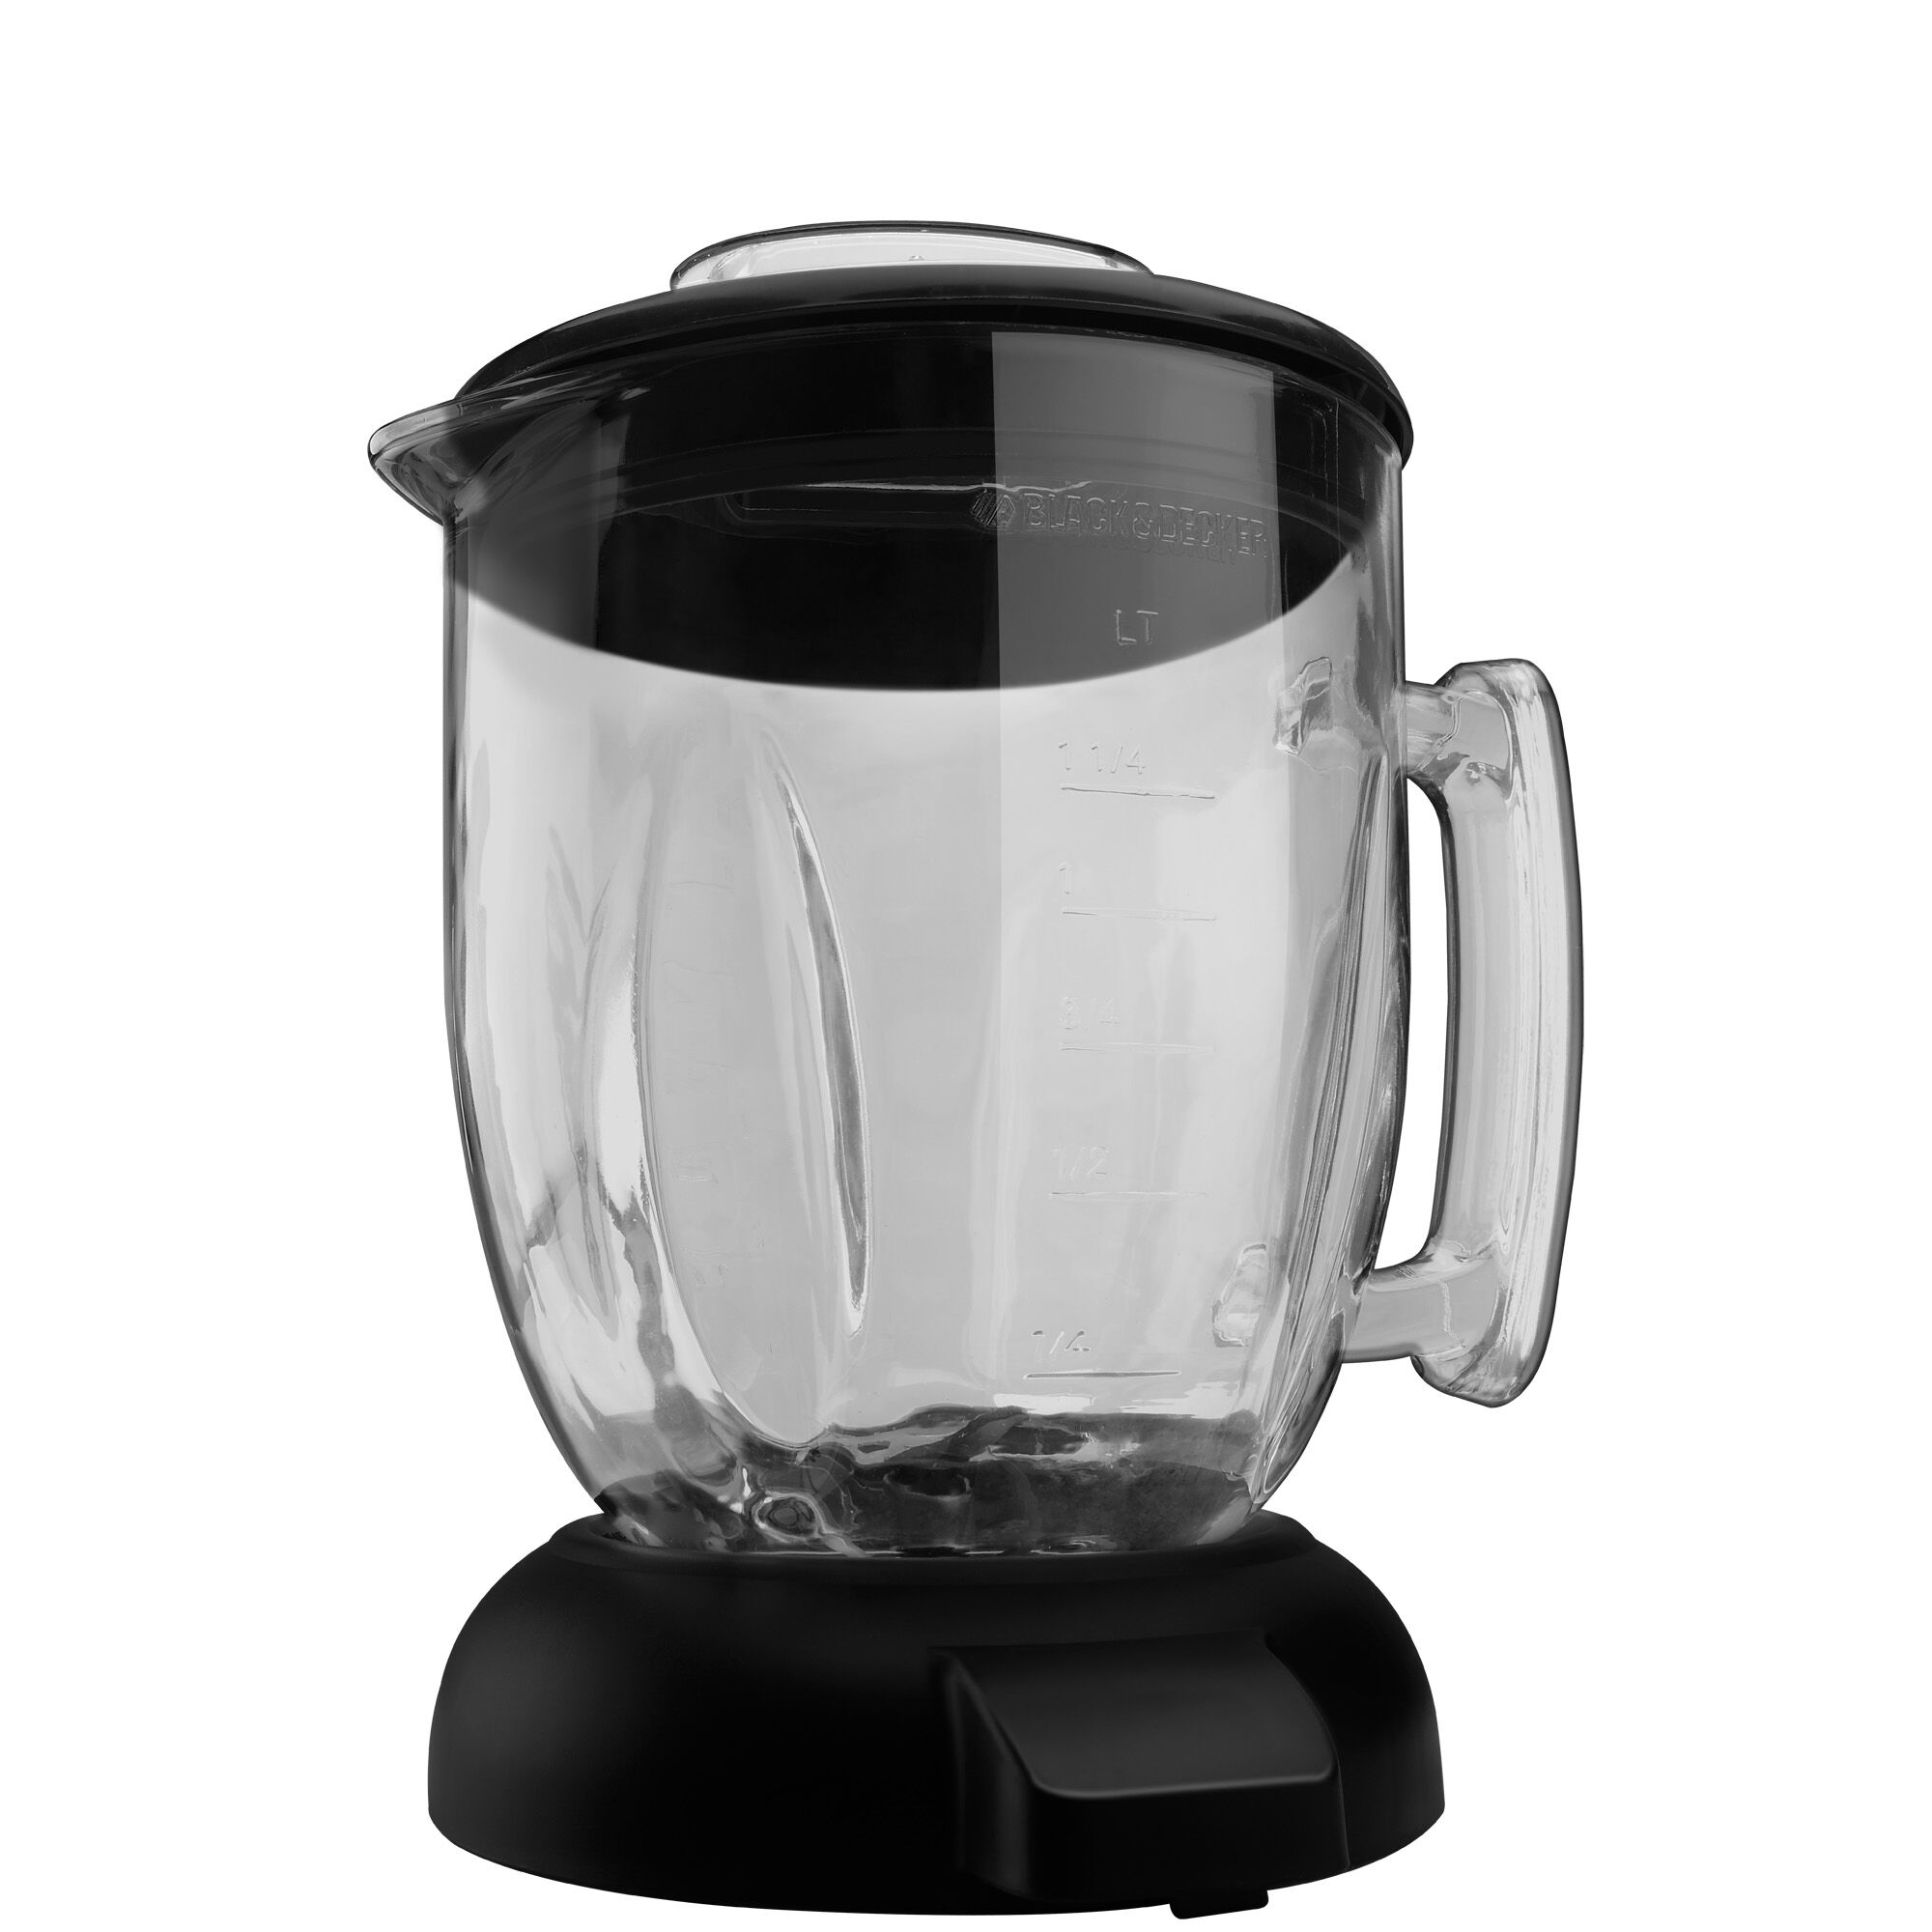 Power Pro 2 in 1 Food Processor and Blender.